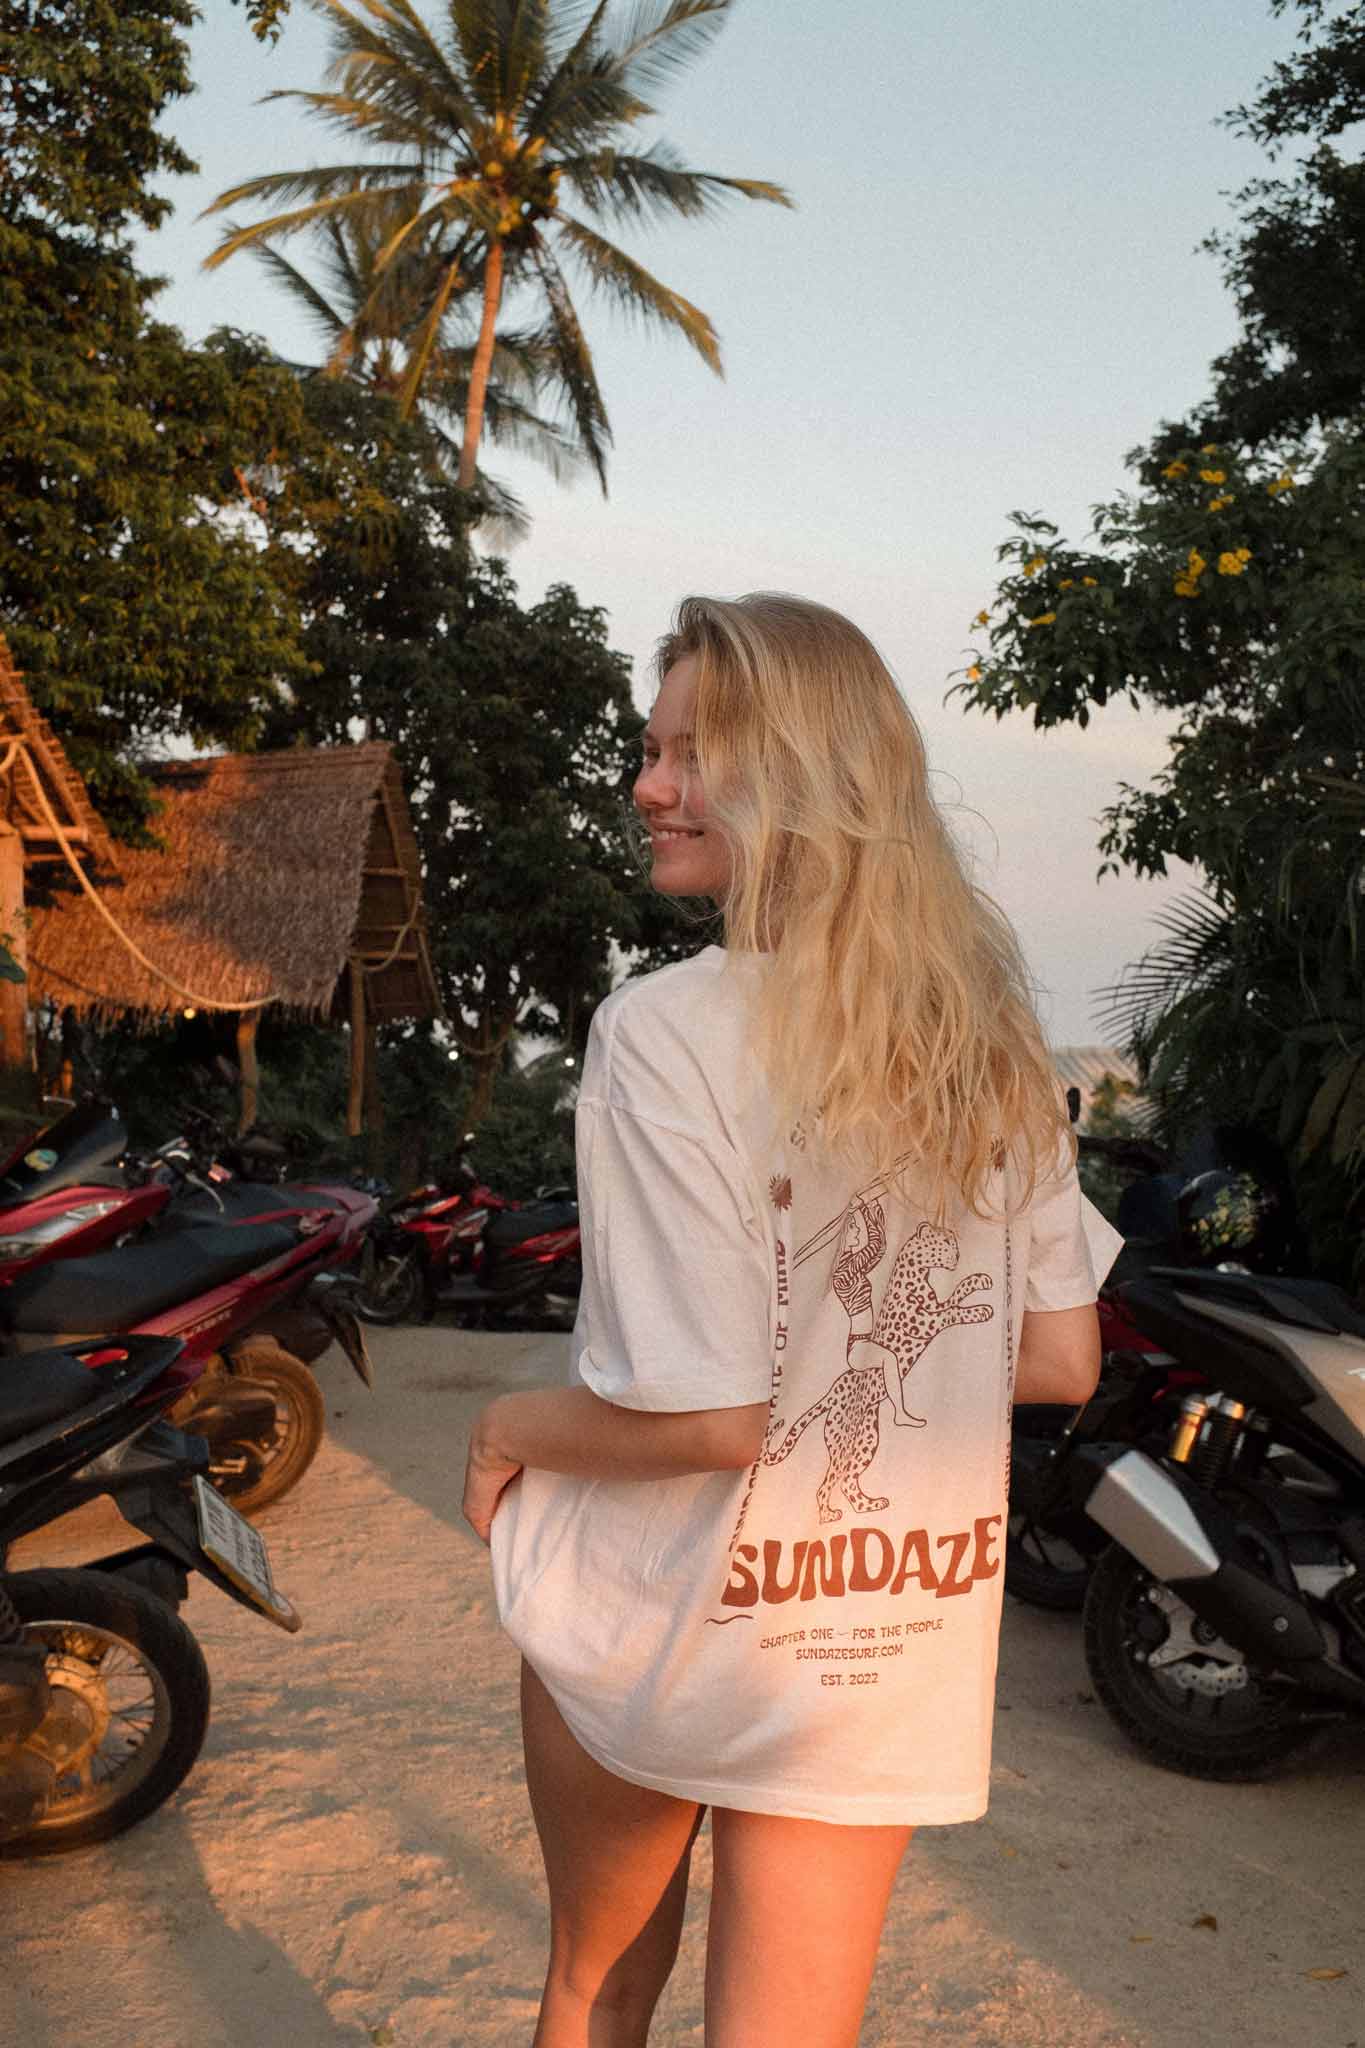 Model wearing the Chapter One Tee in tropical setting